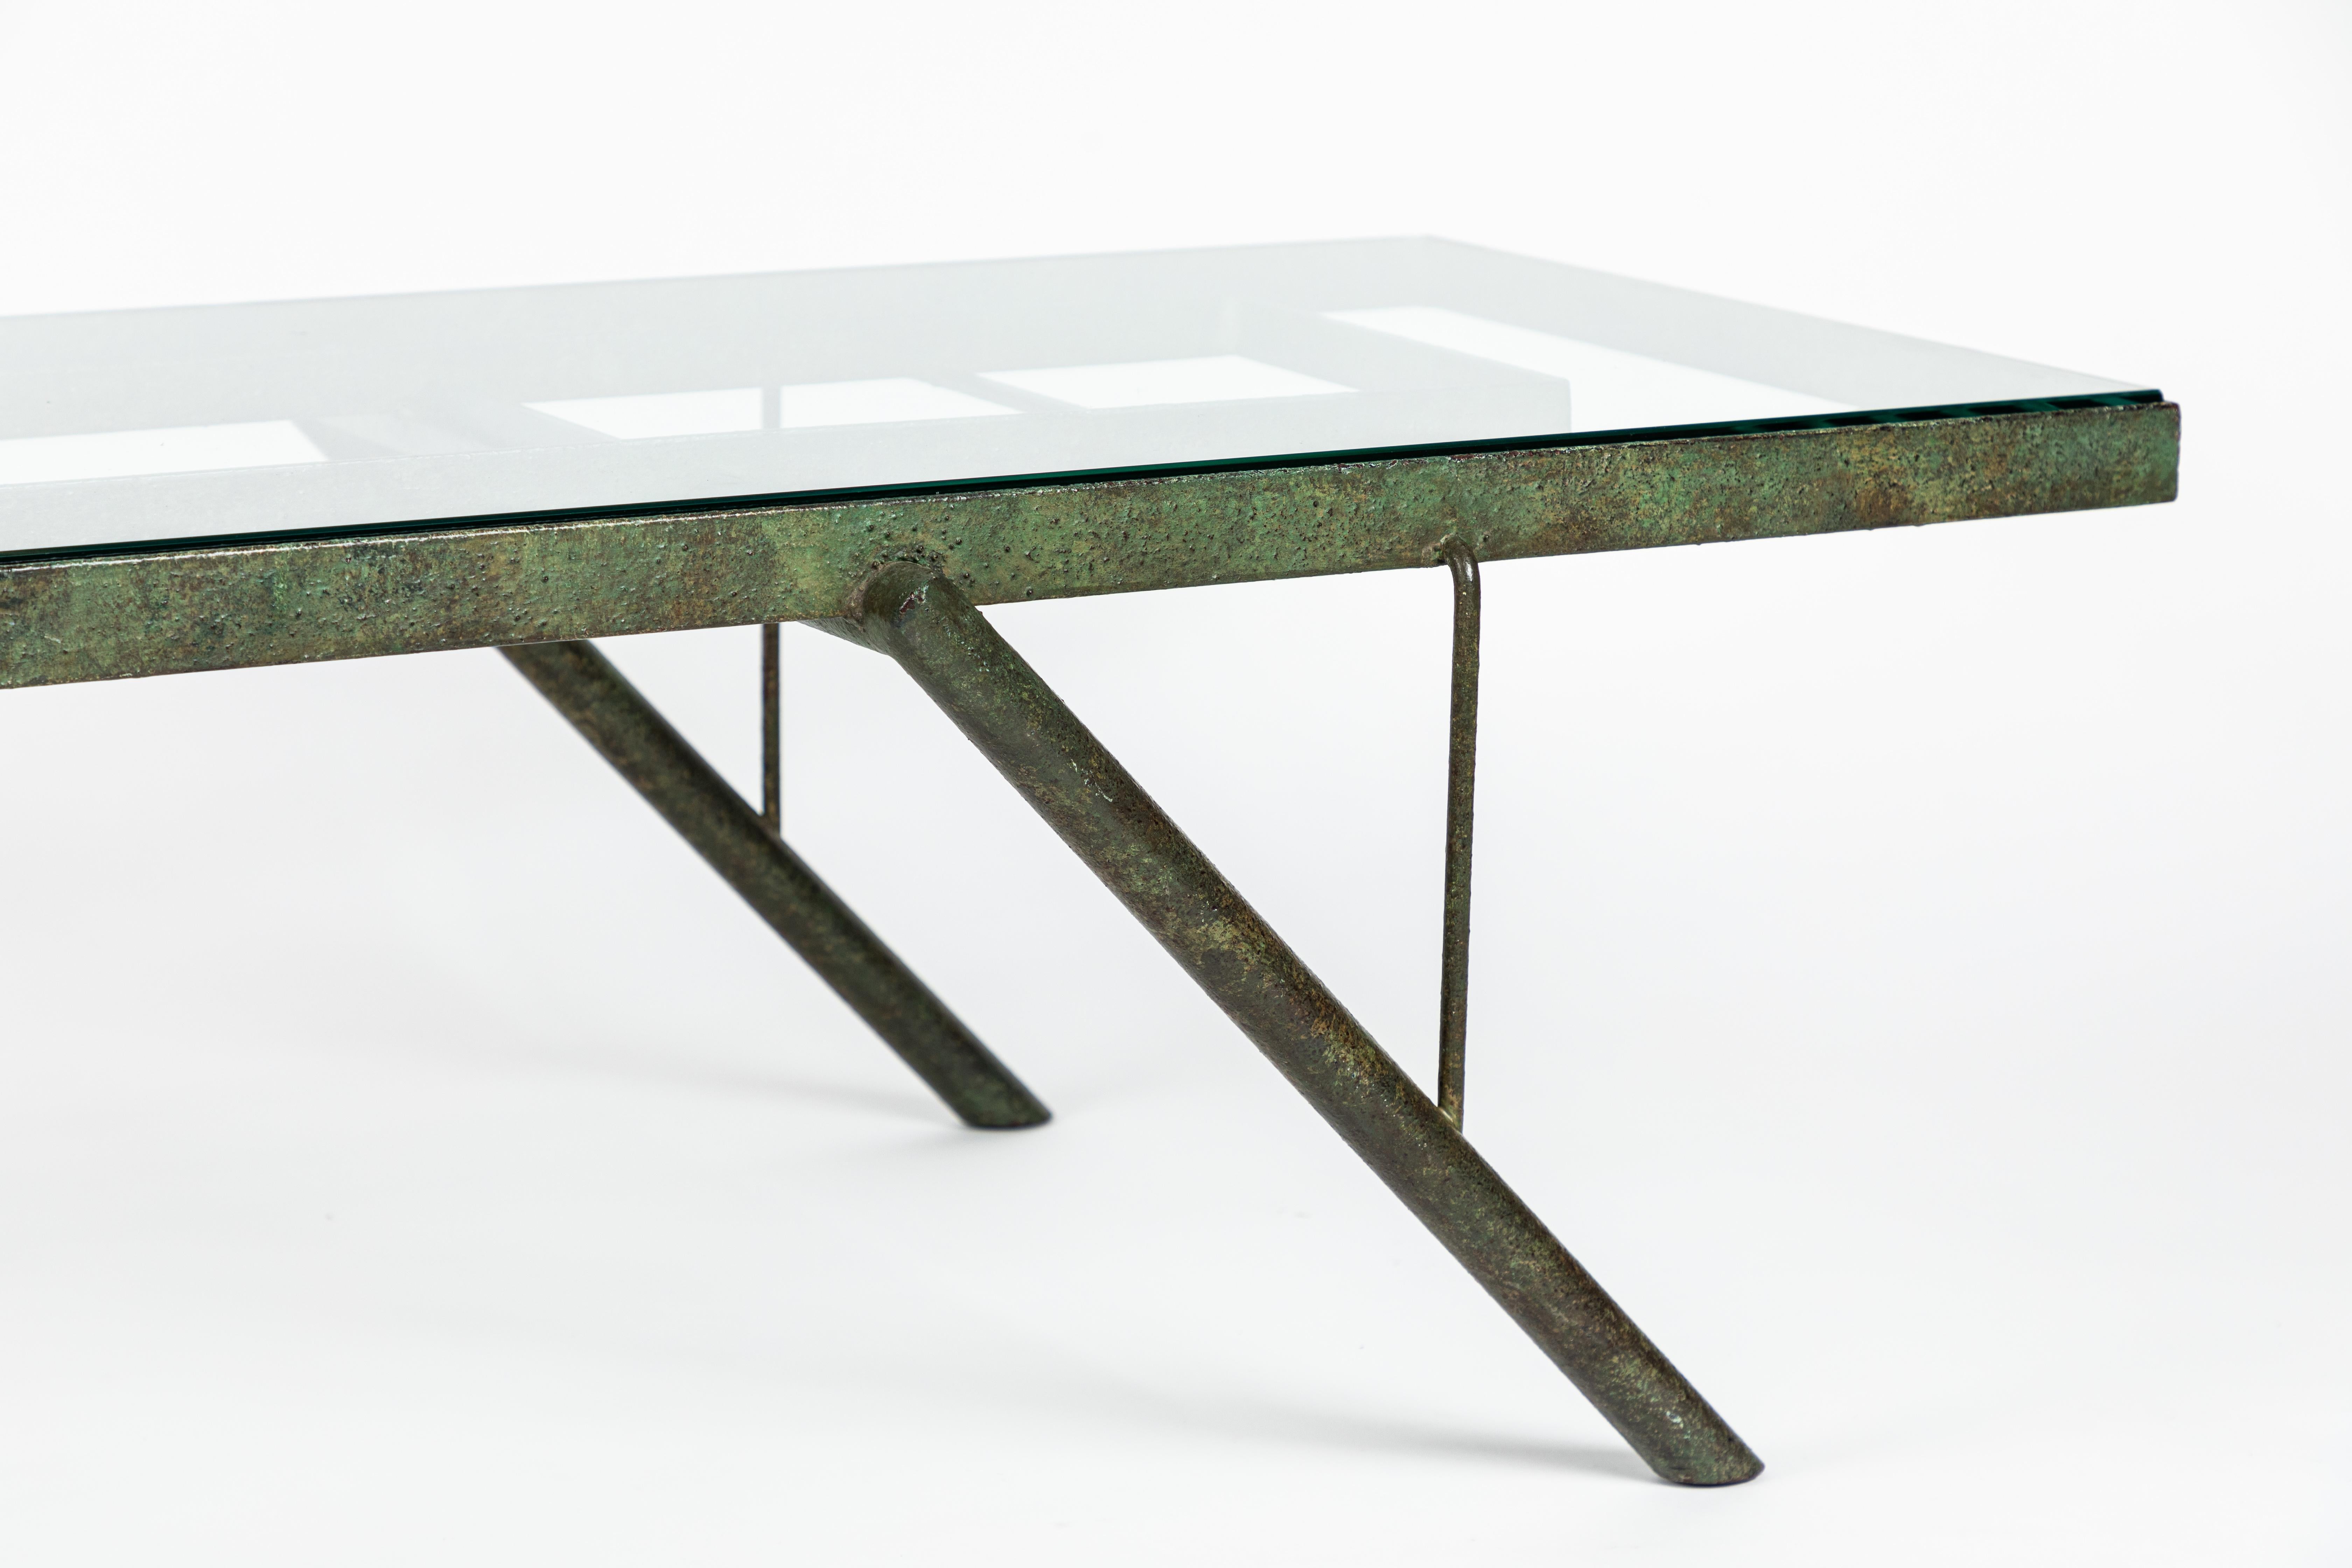 Iron and Glass Cocktail Table designed by William Haines 1